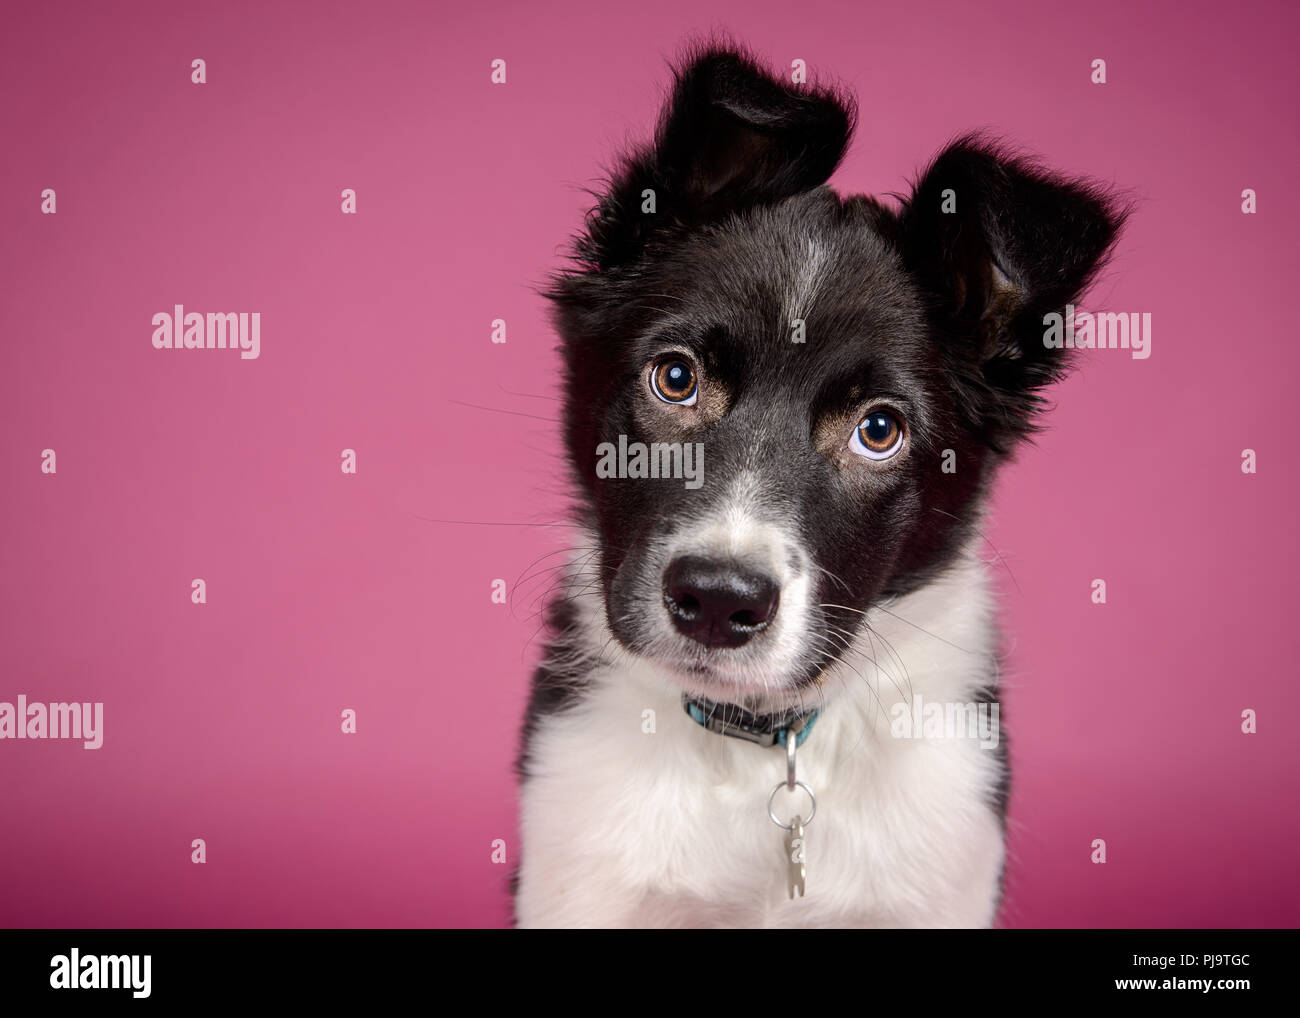 Black and White Border Collie Puppy on Pink Background Stock Photo